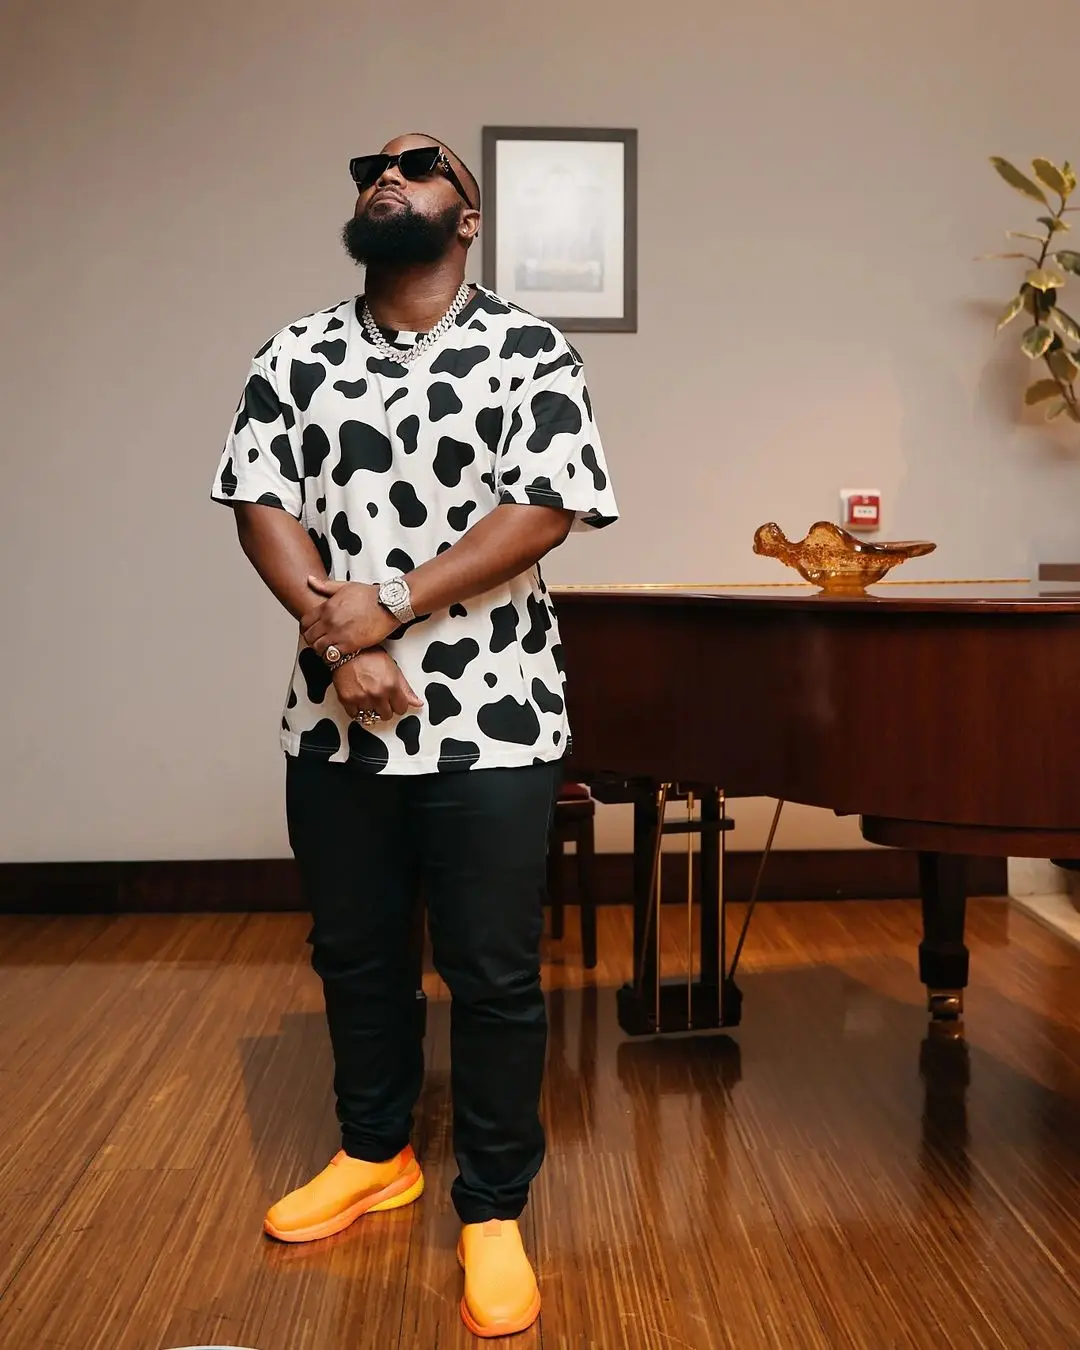 Cassper Nyovest on how he changed his life